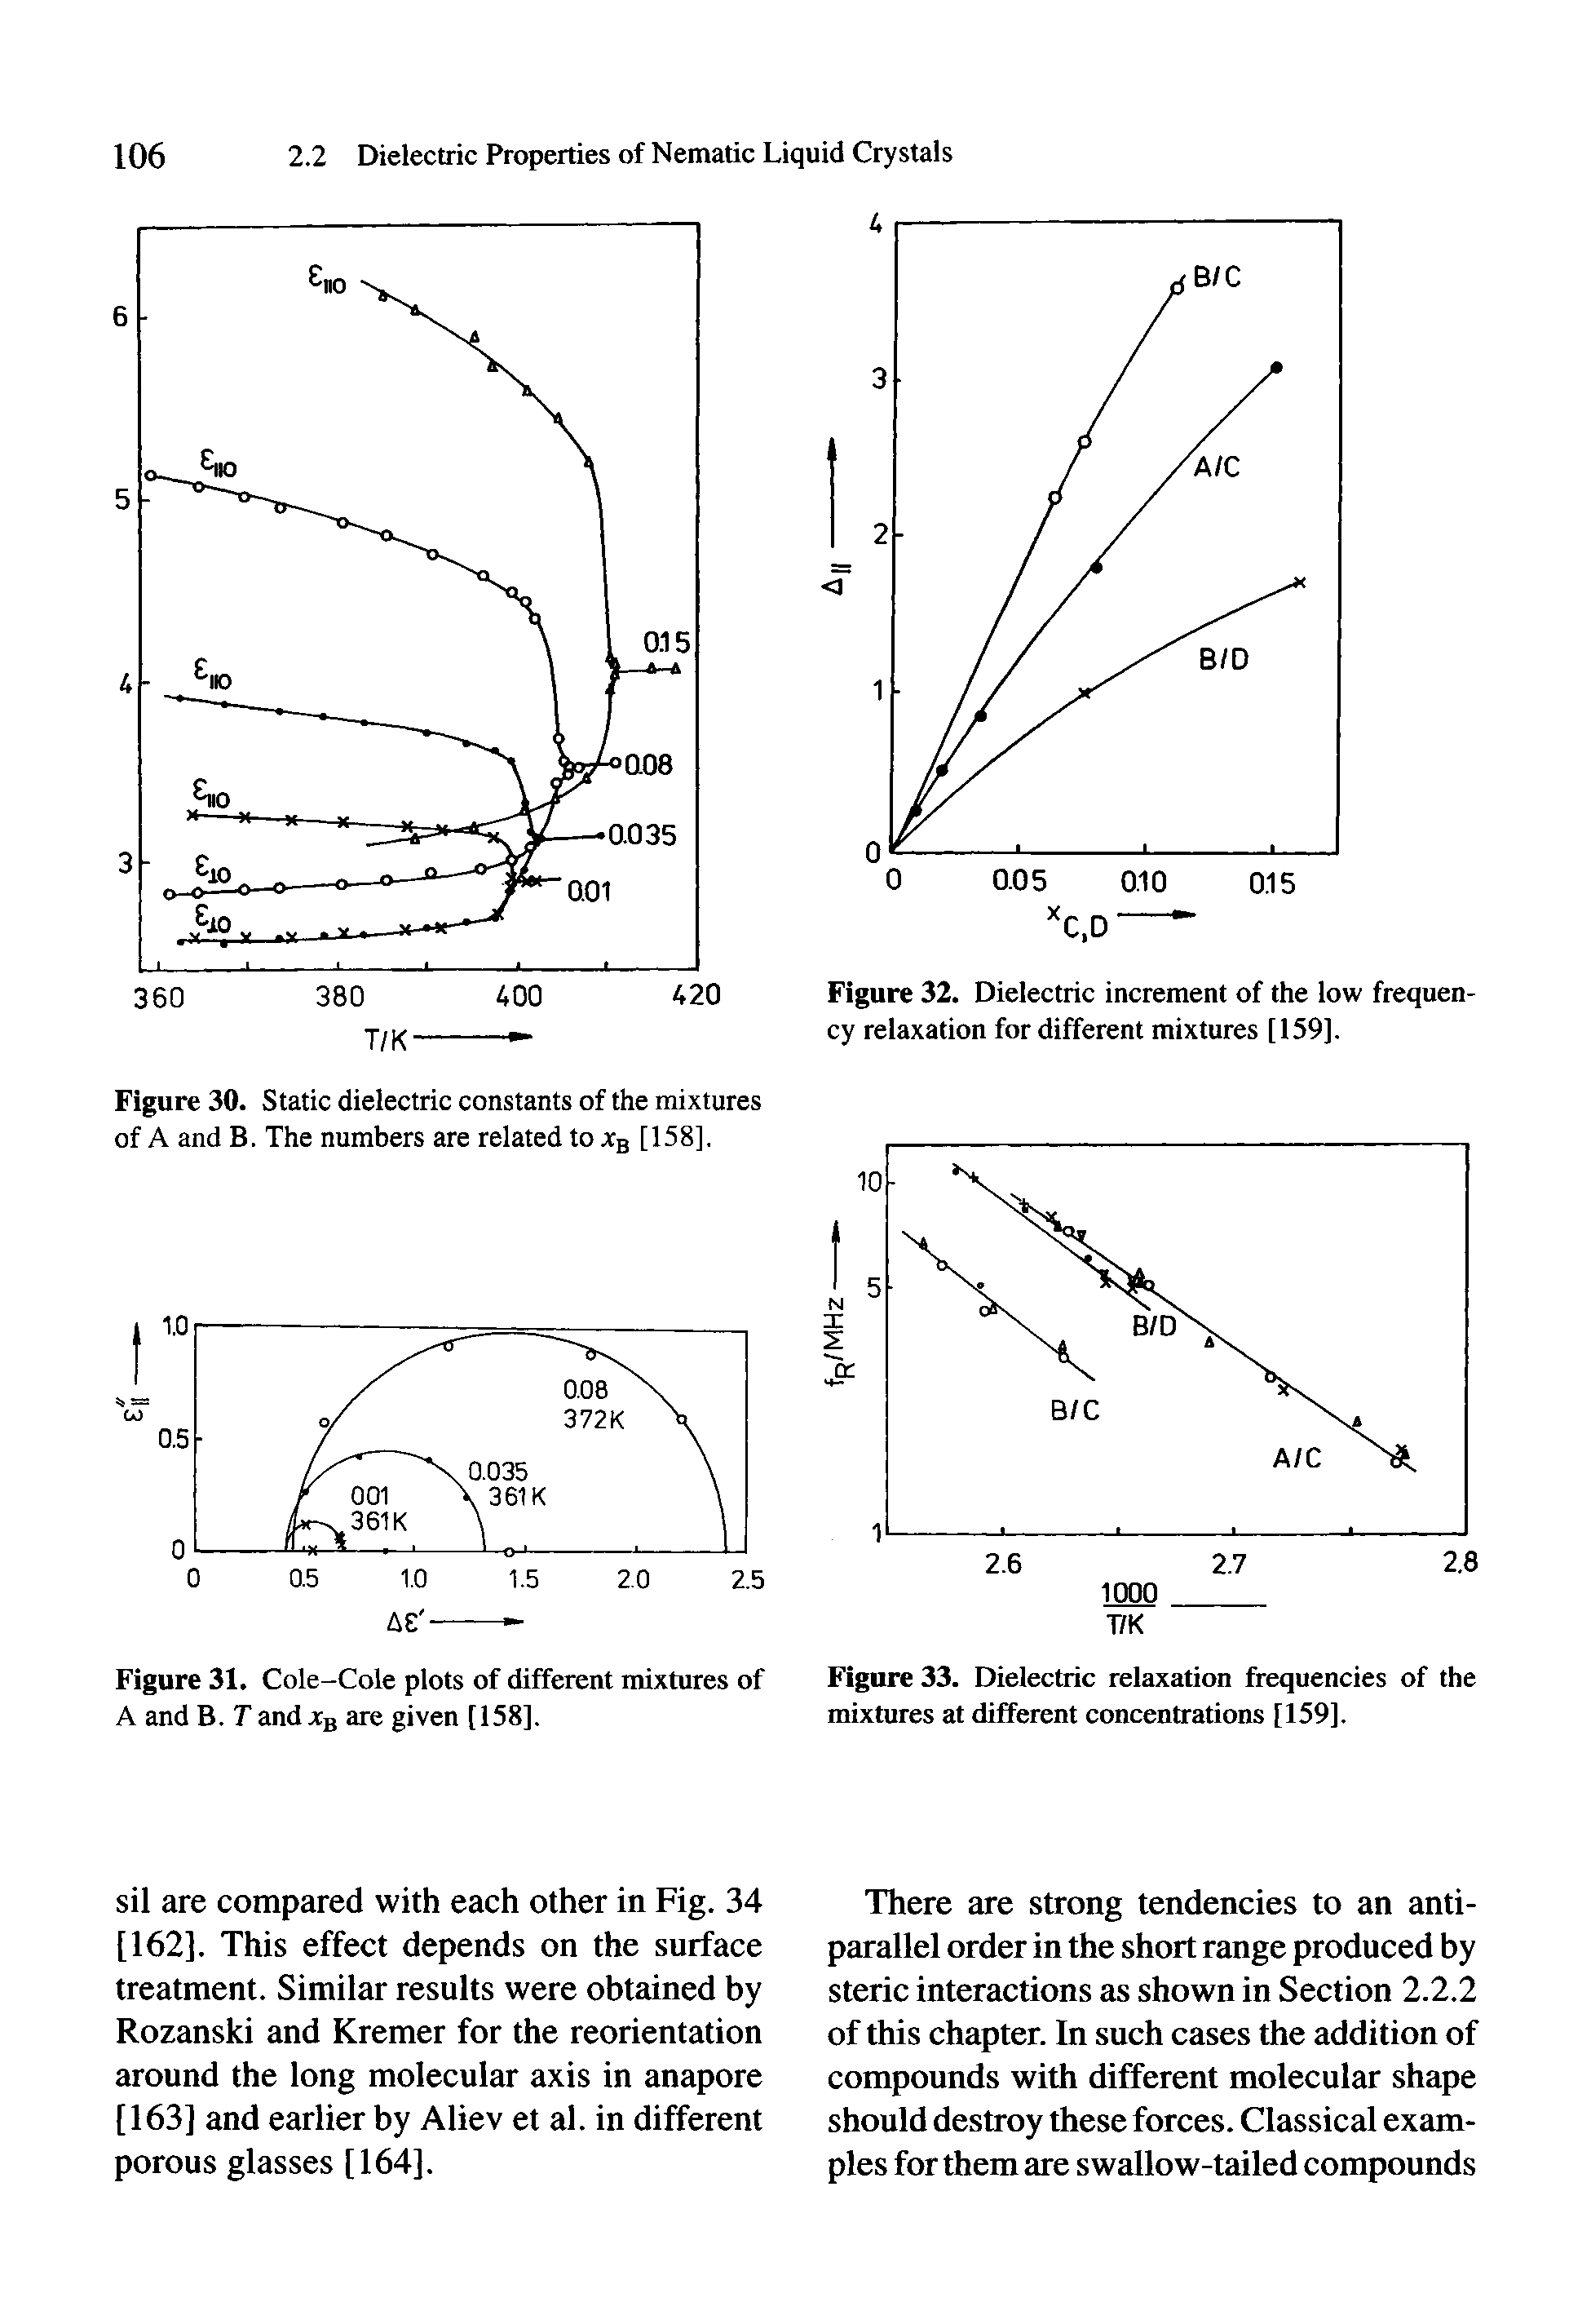 Figure 32. Dielectric increment of the low frequency relaxation for different mixtures [159].